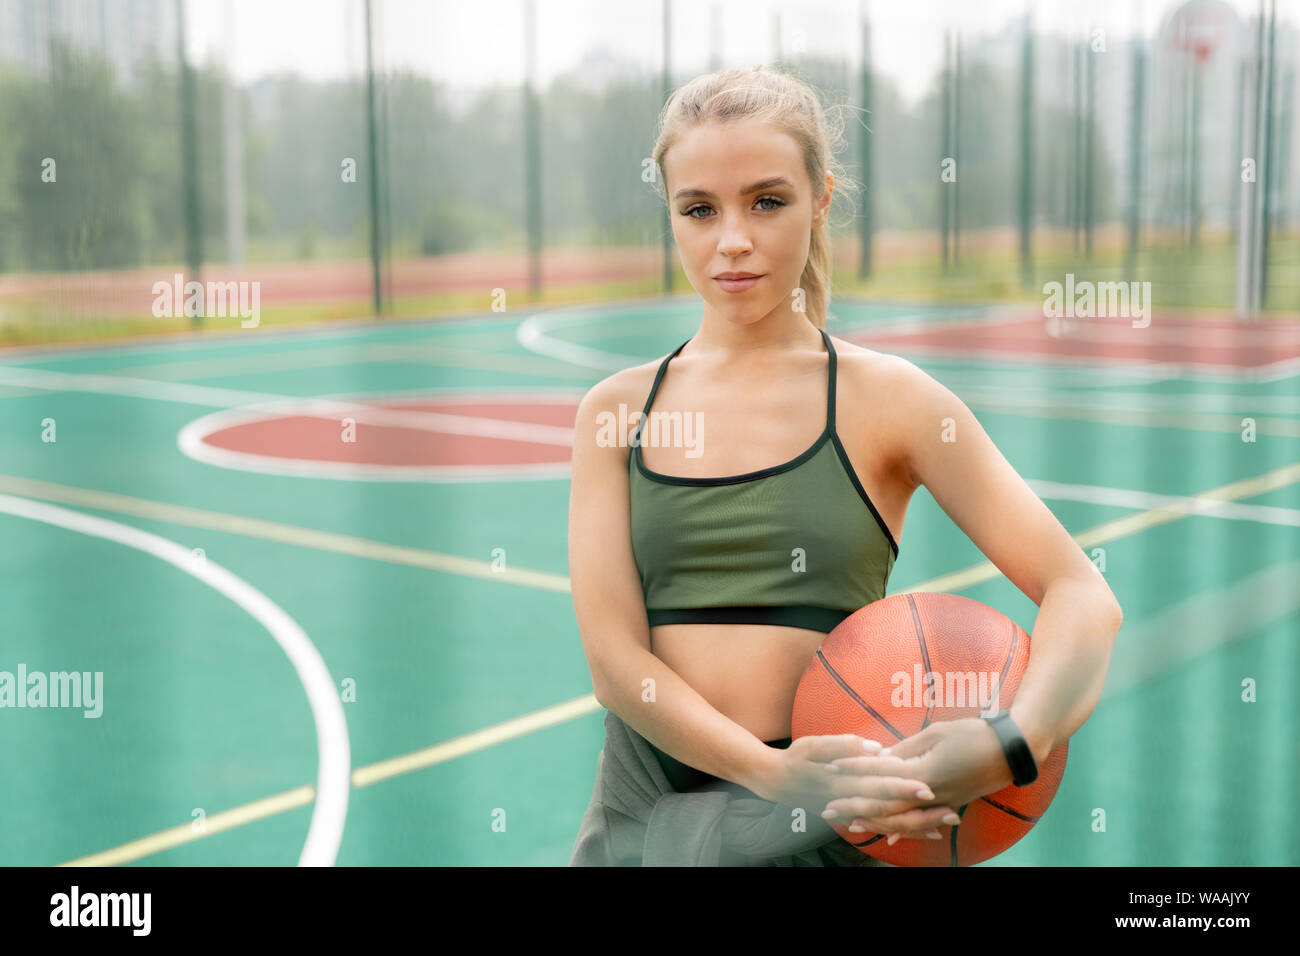 Pretty young woman in activewear holding ball for playing basketball Stock Photo